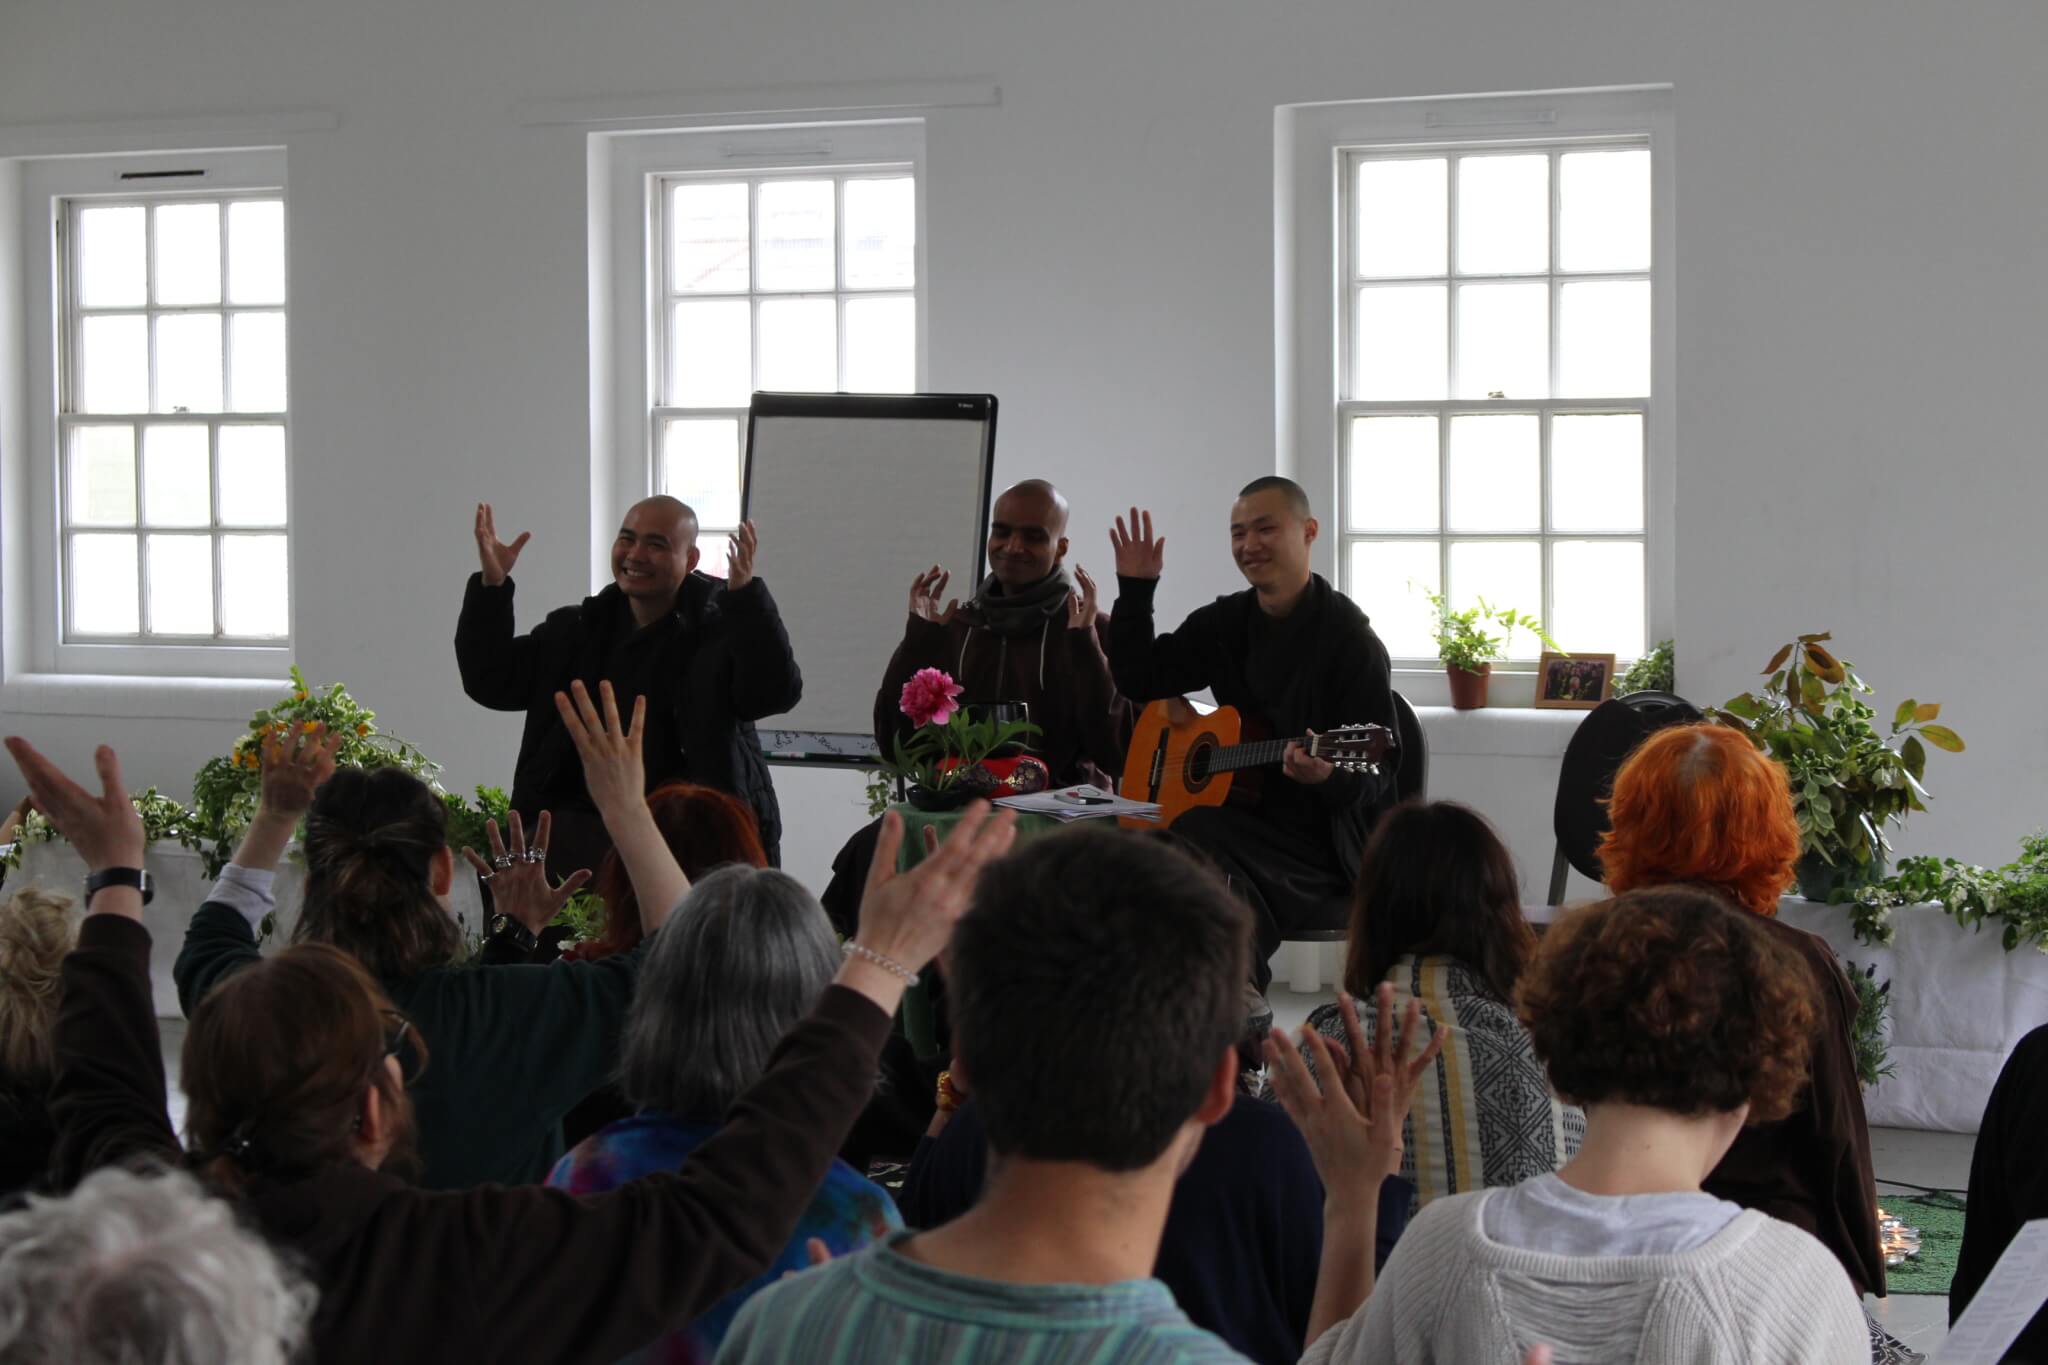 Monastic and practitioners at London hub